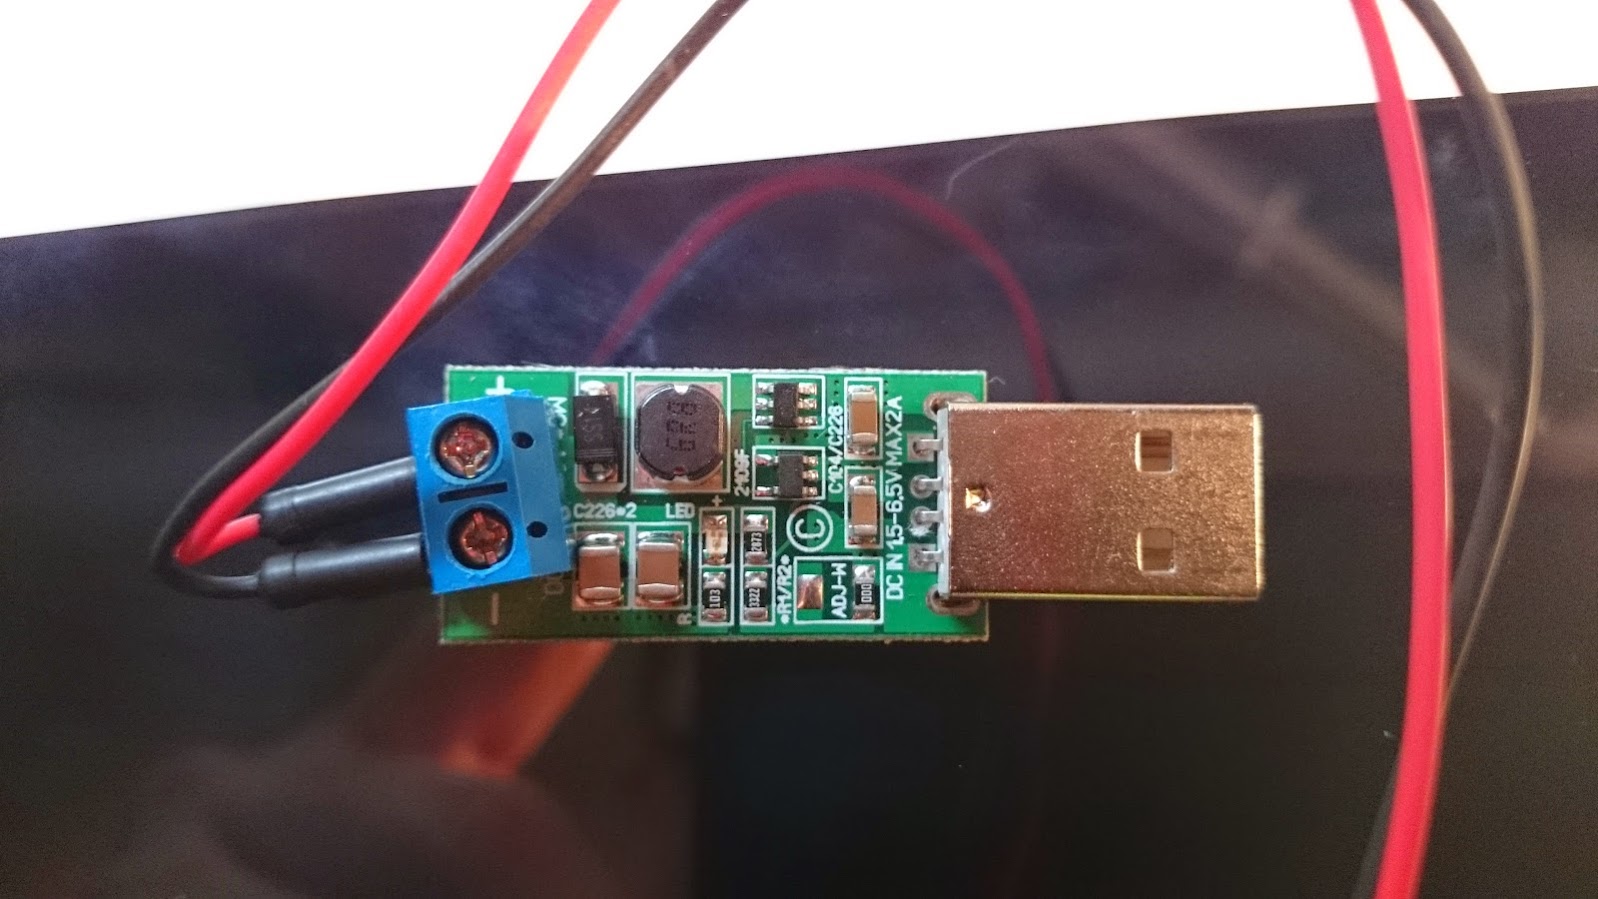 Simple USB power regulator. Takes 5v power from usb and ups the voltage to 12v. Will be used to power the top side adapter.<br />Will combine this and the TP-link adapter in one case with connectors for power, Ethernet and tether.